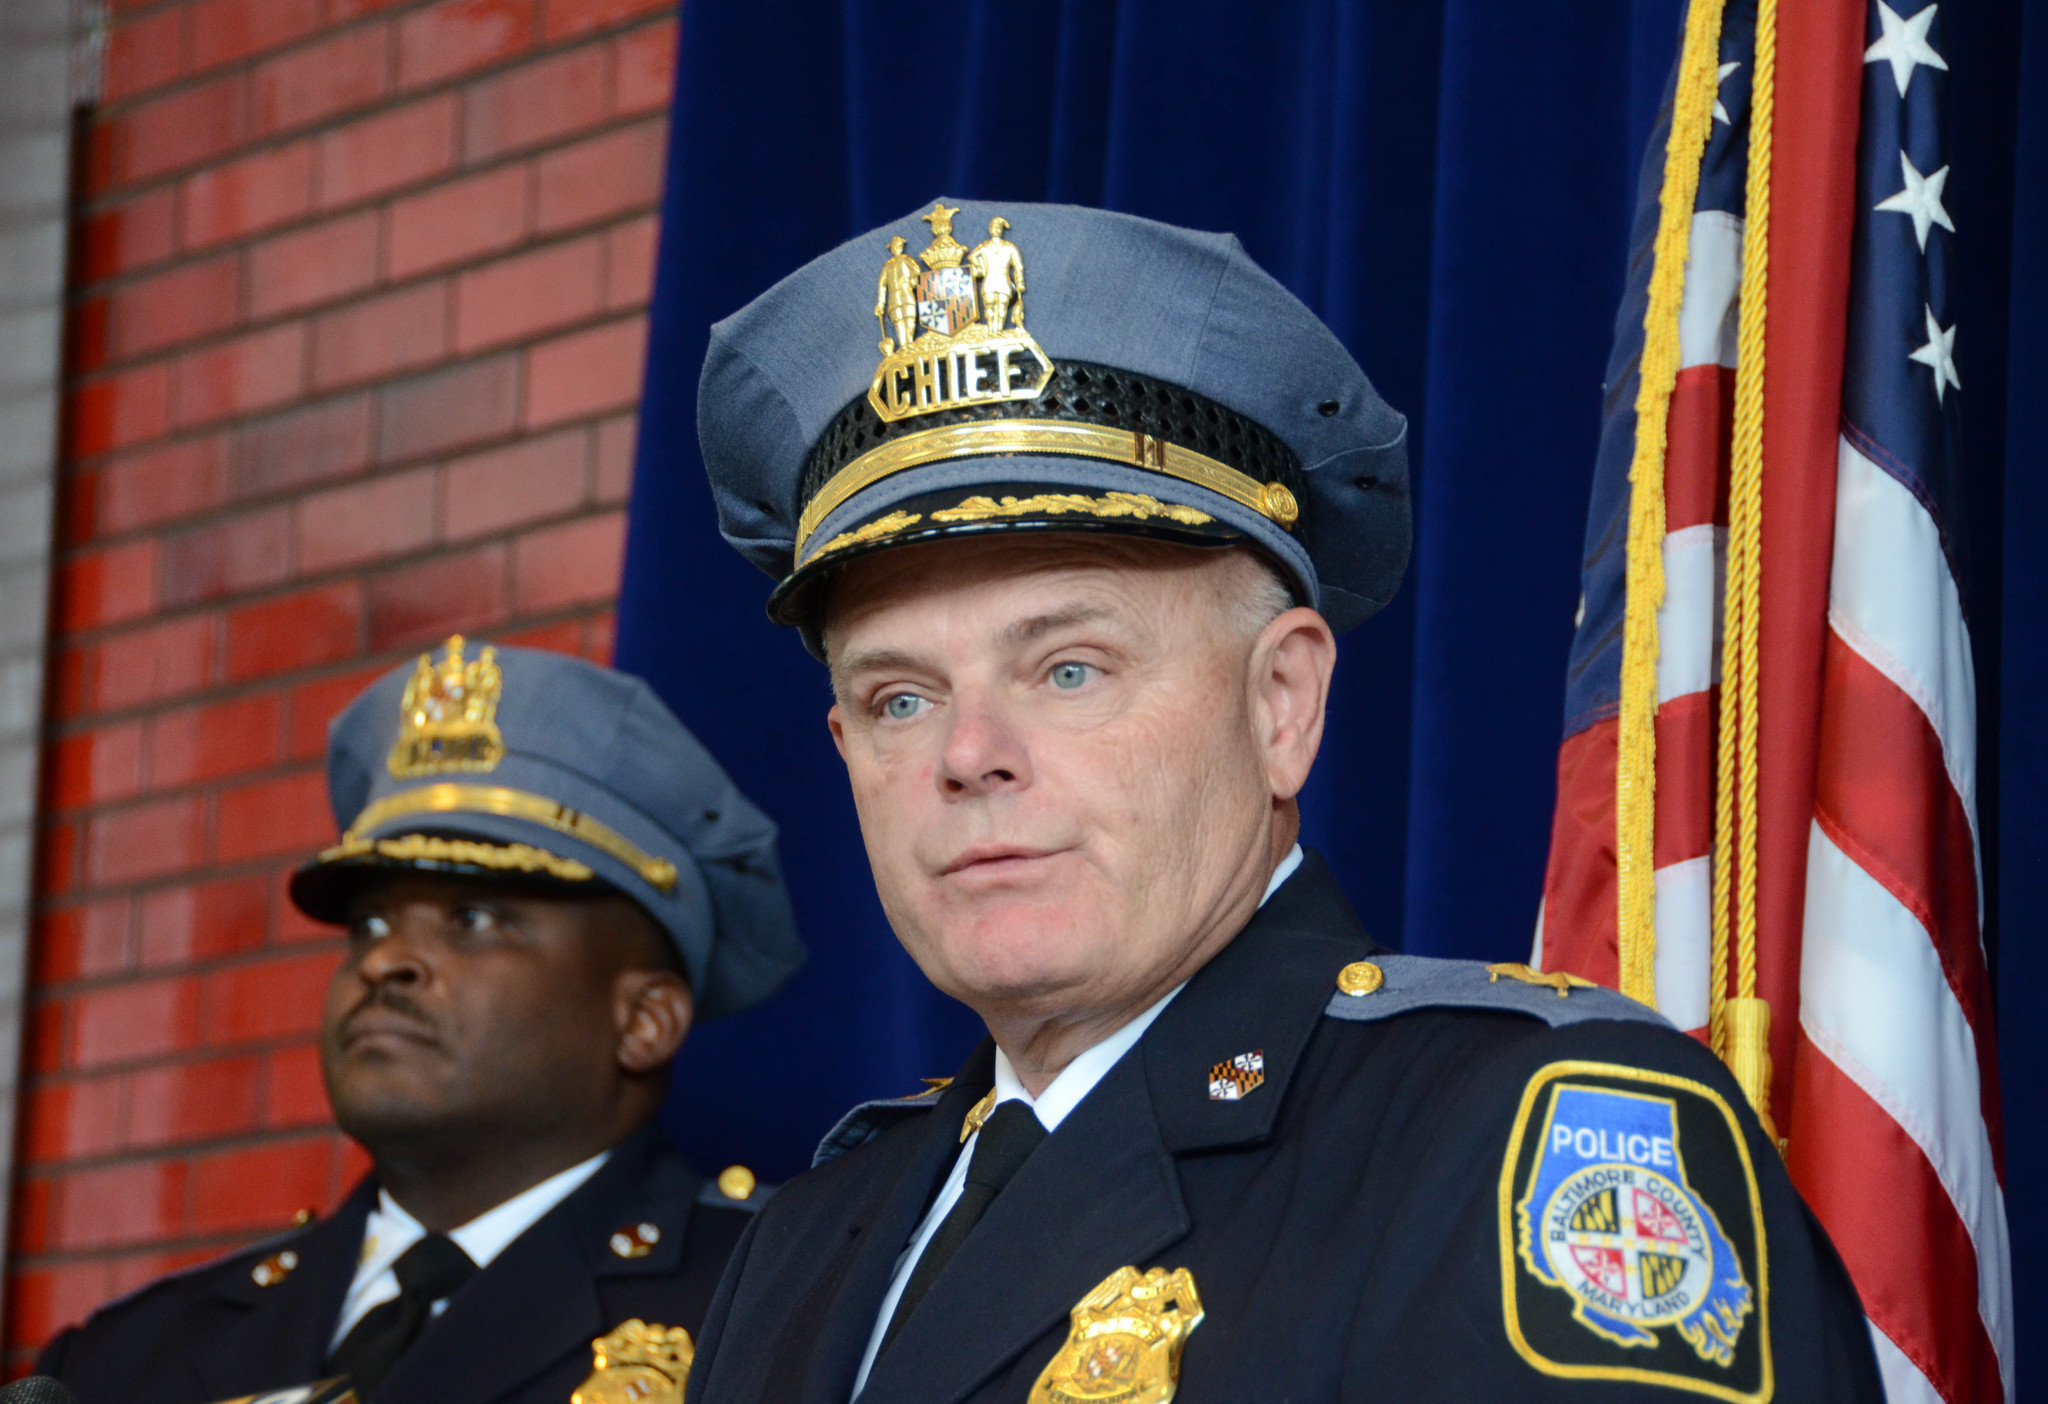 Police chief is top earner in Baltimore County government - Capital Gazette